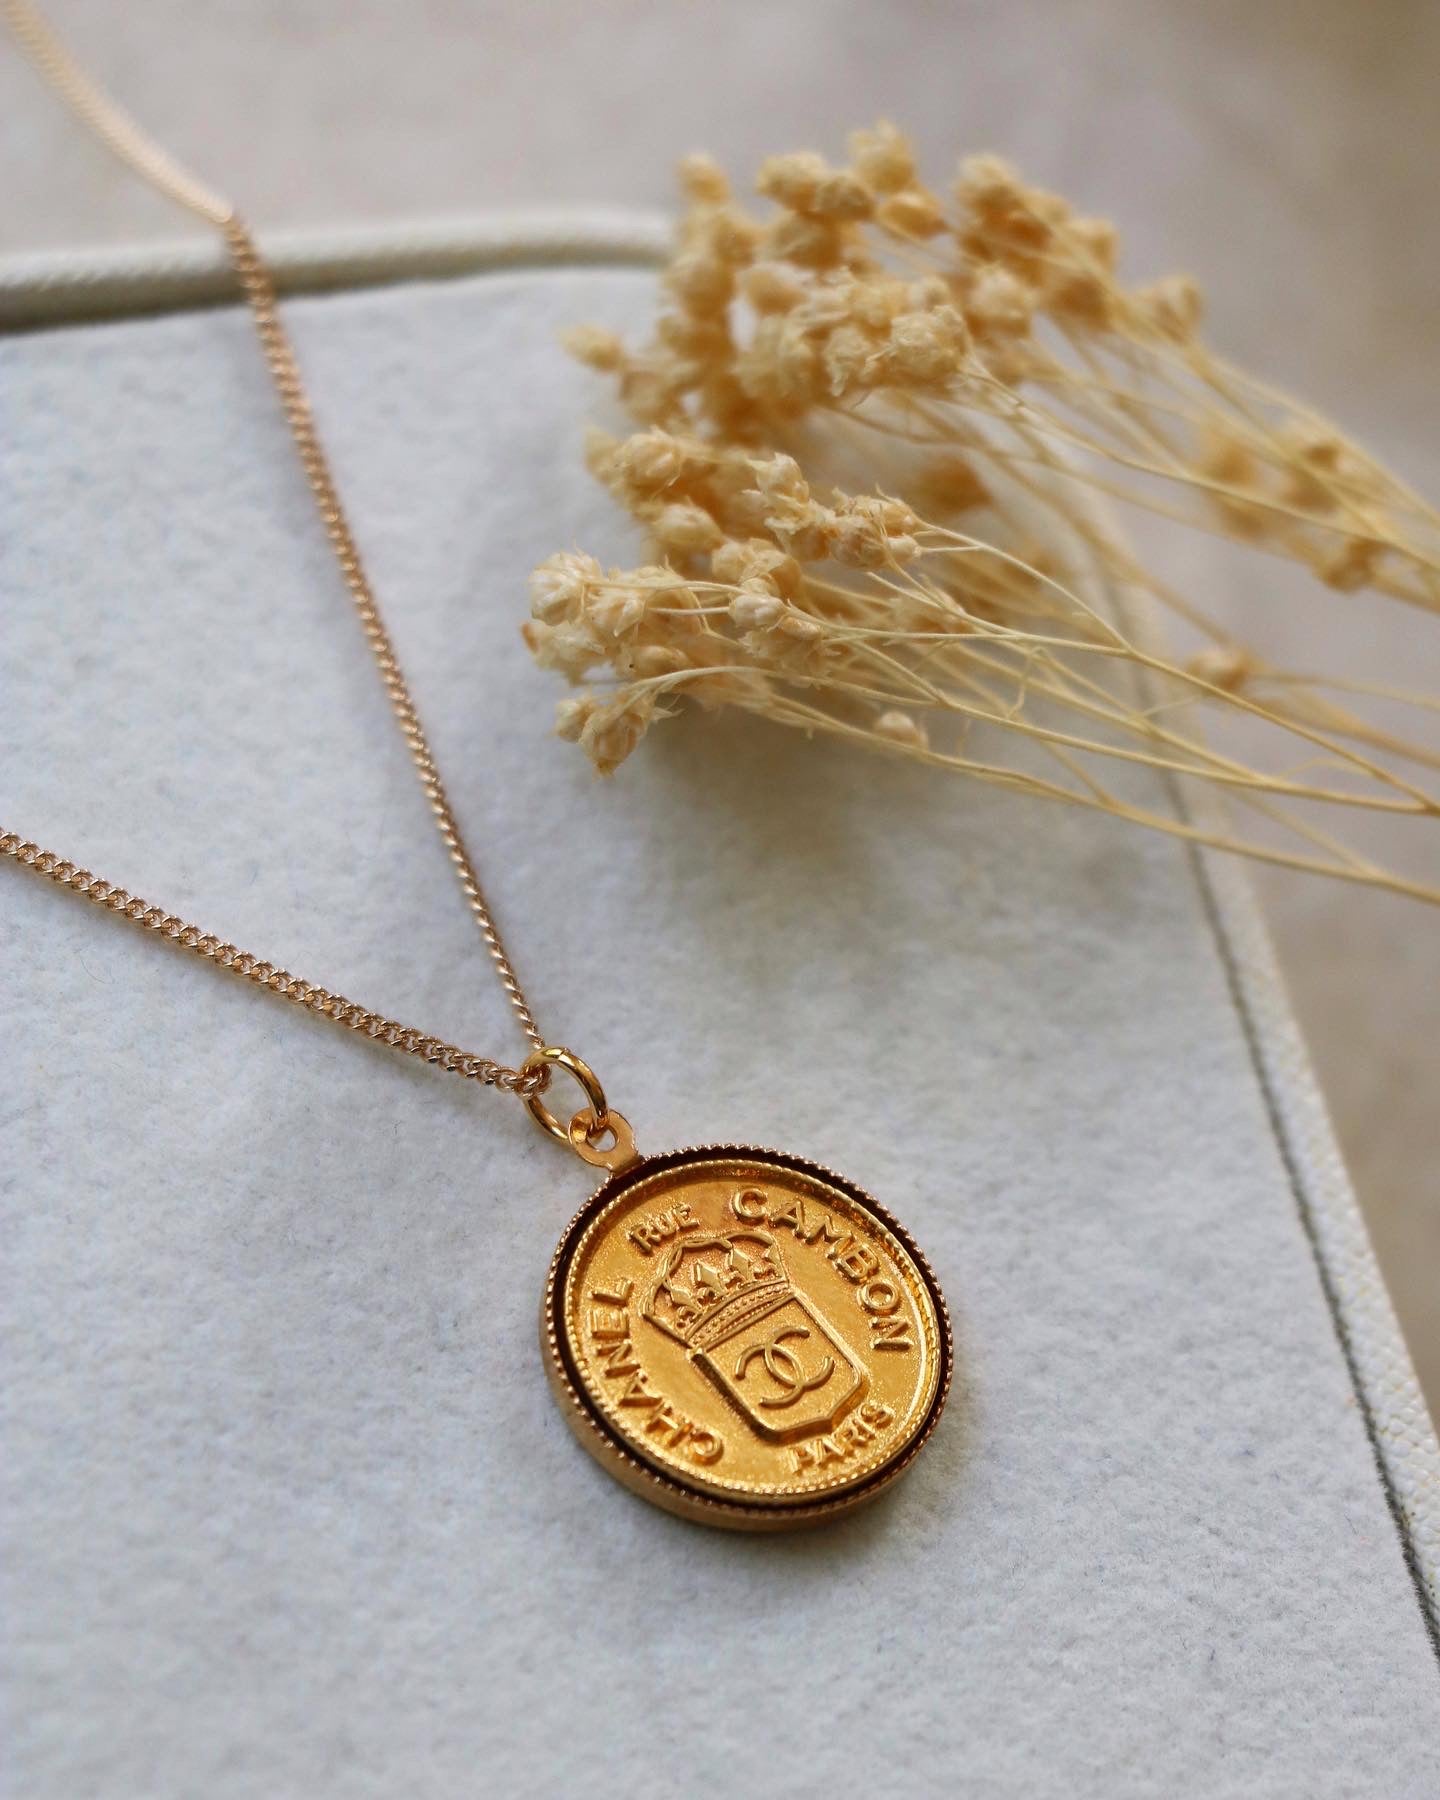 COLLIER UPCYCLÉ CHANEL | "RUE CAMBON"